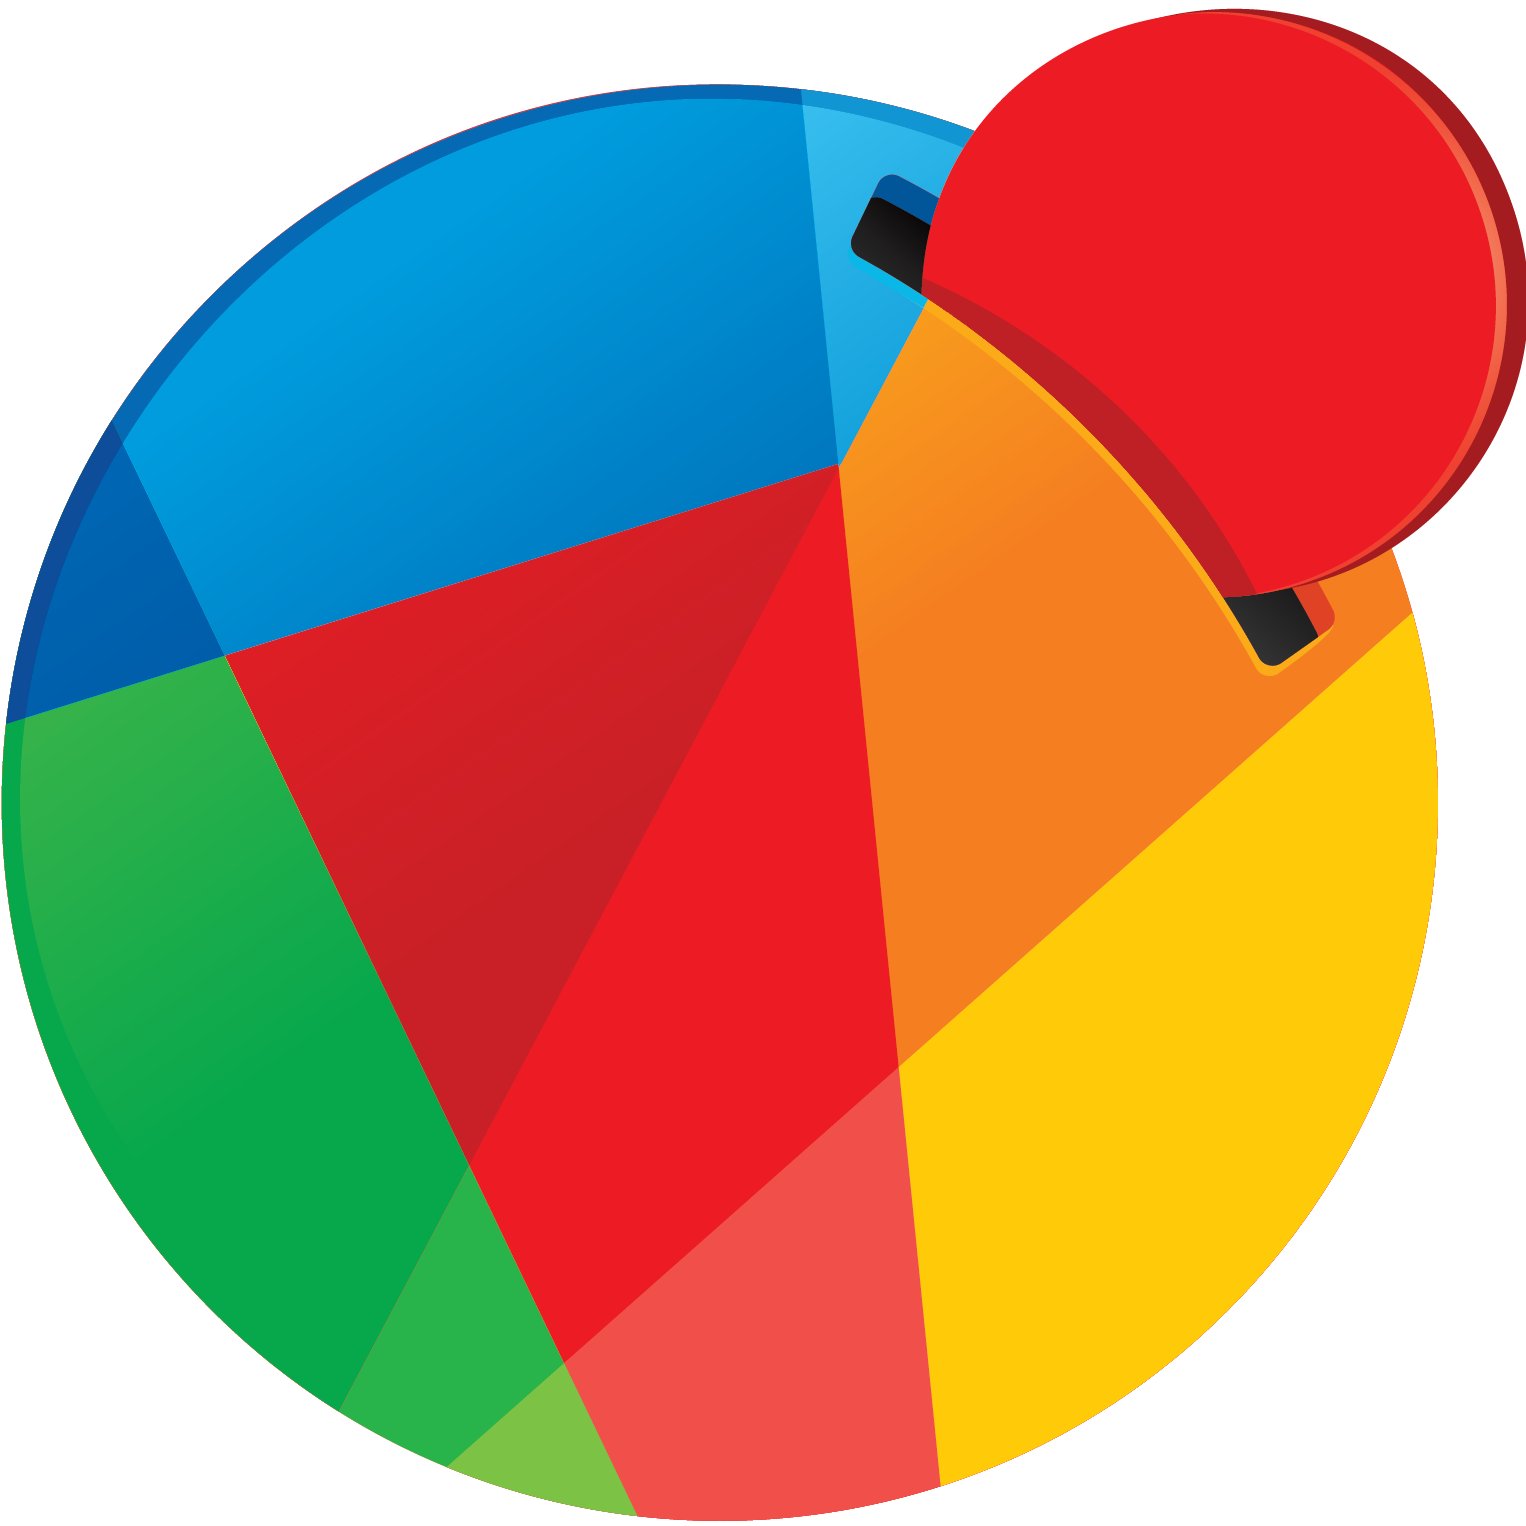 Tweeting the latest news and events regarding Reddcoin from various trusted sources